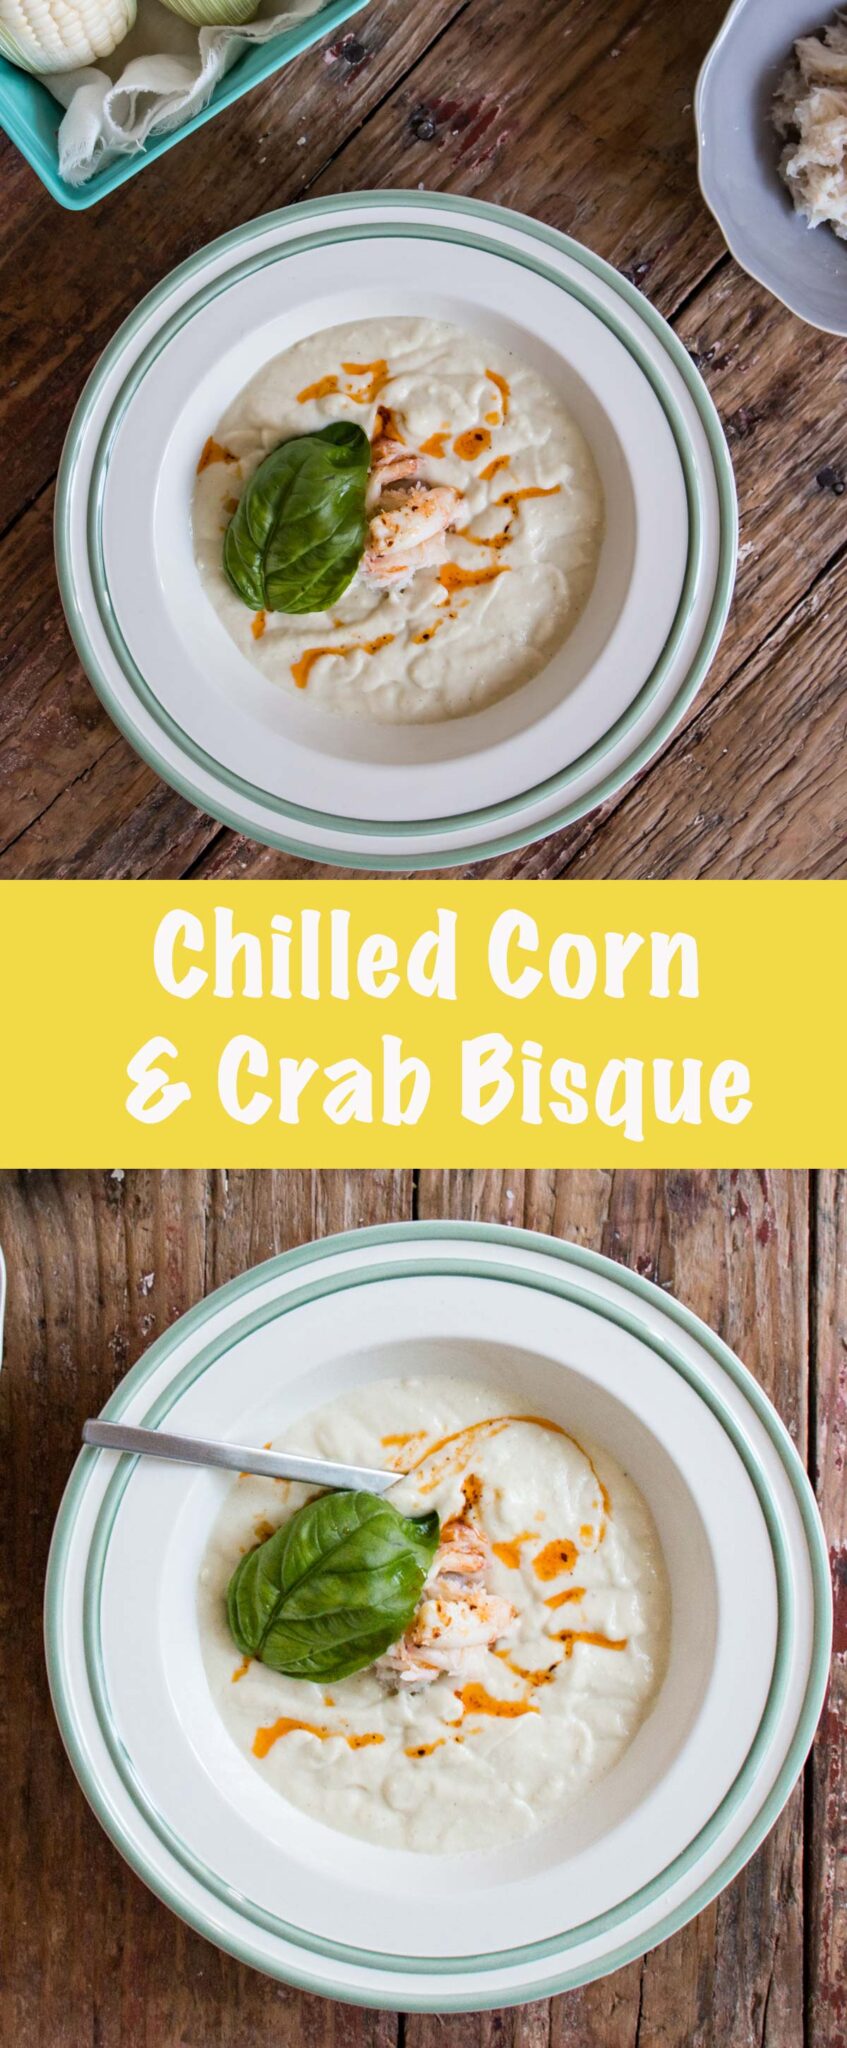 Long collage of Chilled Corn and Crab Bisque